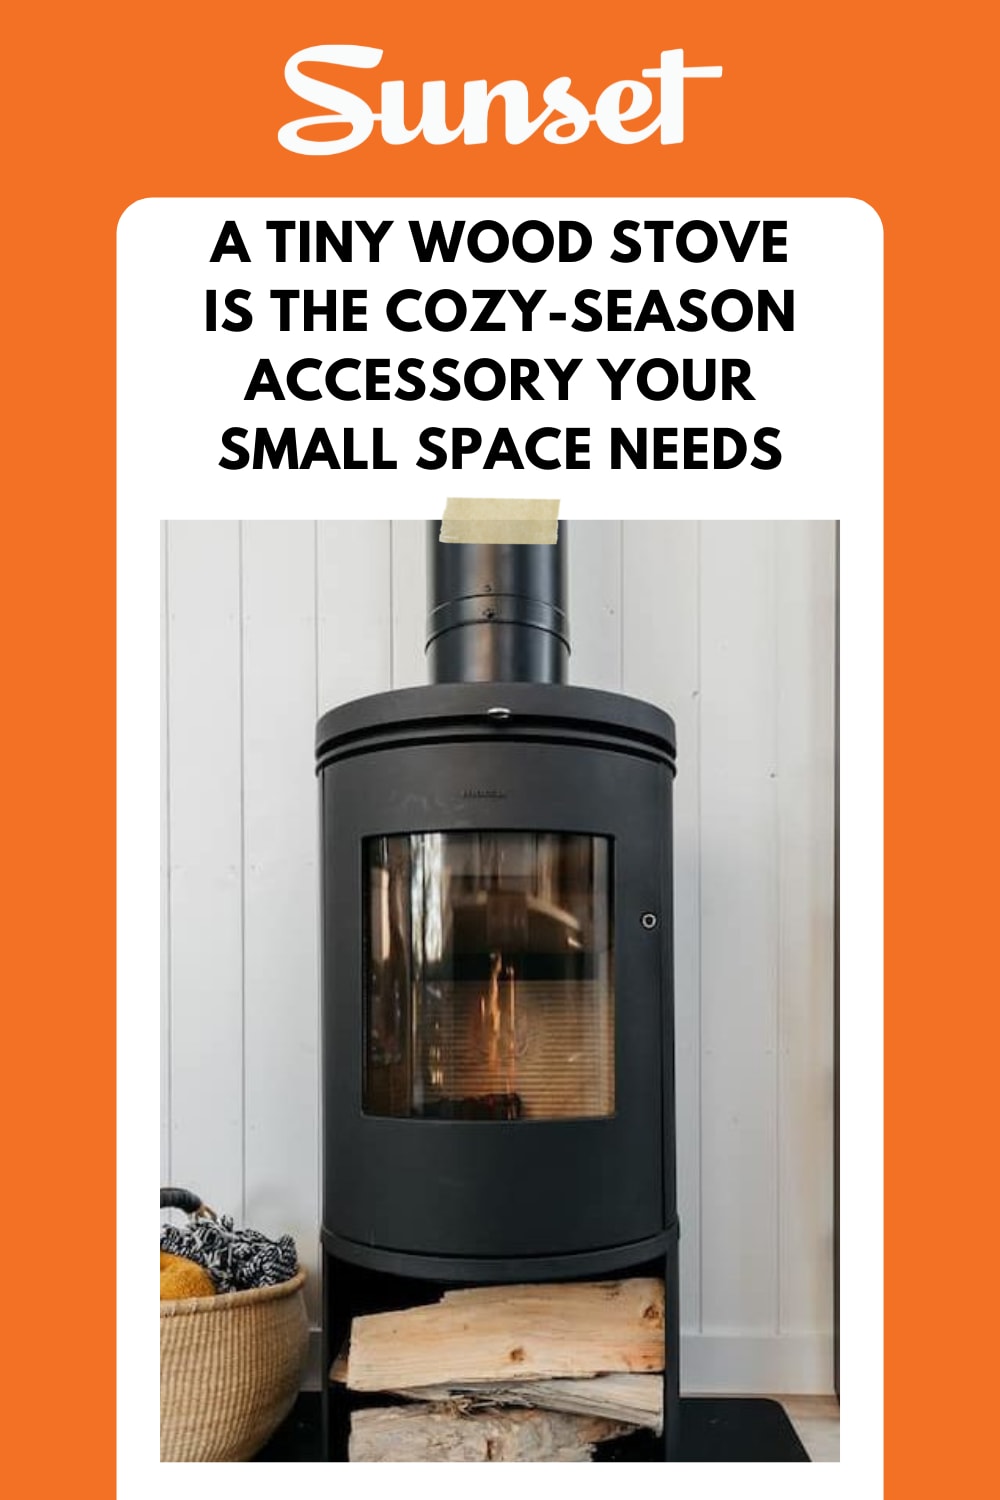 A Tiny Wood Stove Is the Cozy-Season Accessory Your Small Space Needs